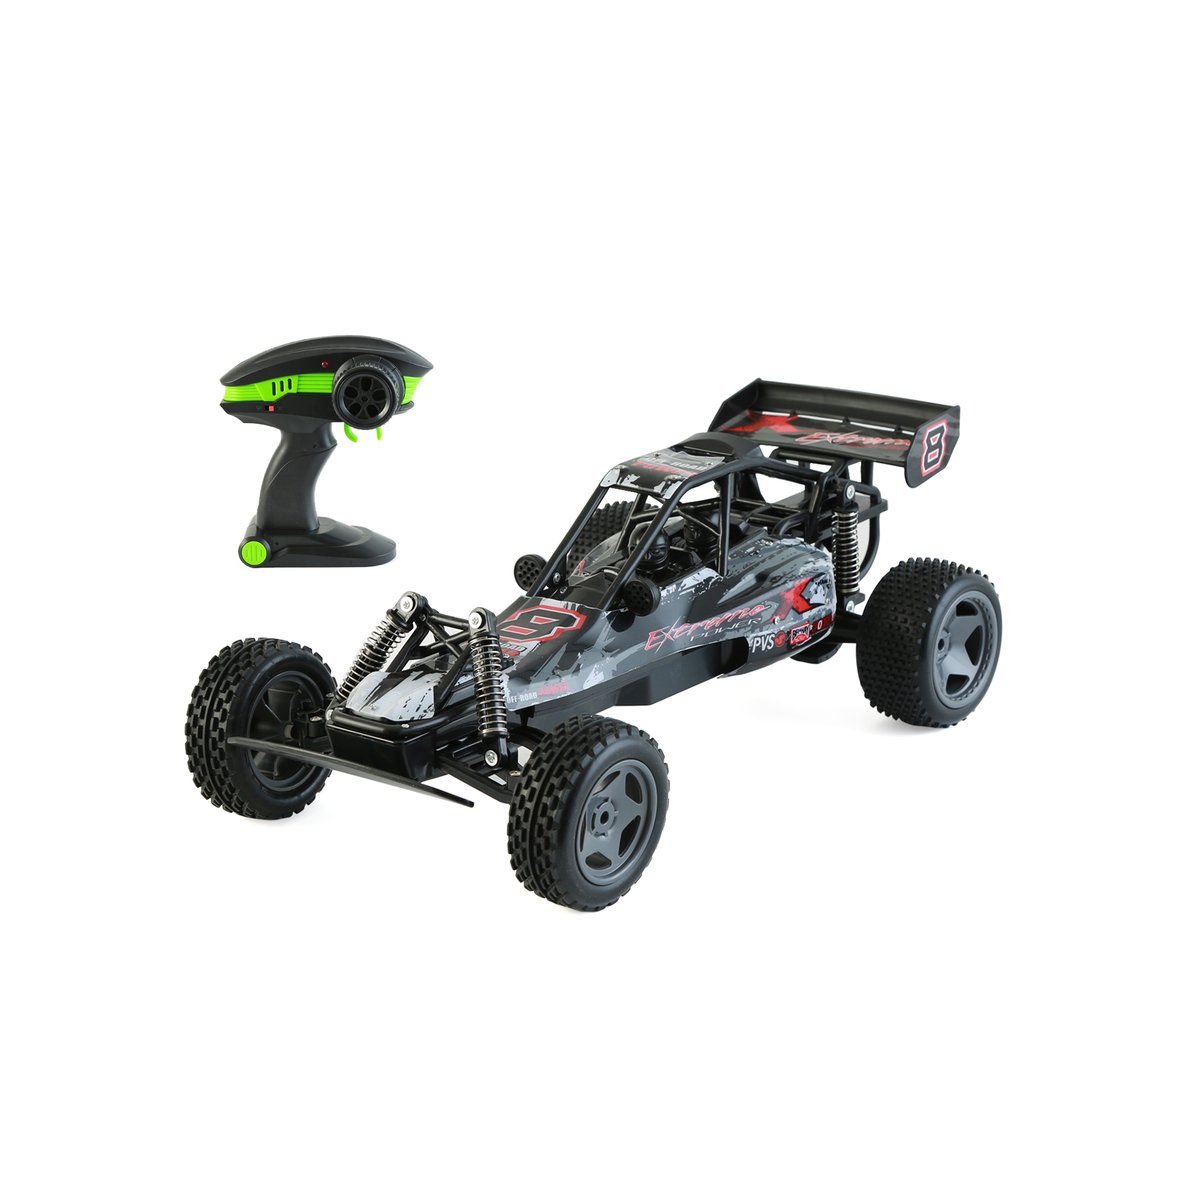 Skid Fusion Rechargeable Remote Control High Speed Car 768A